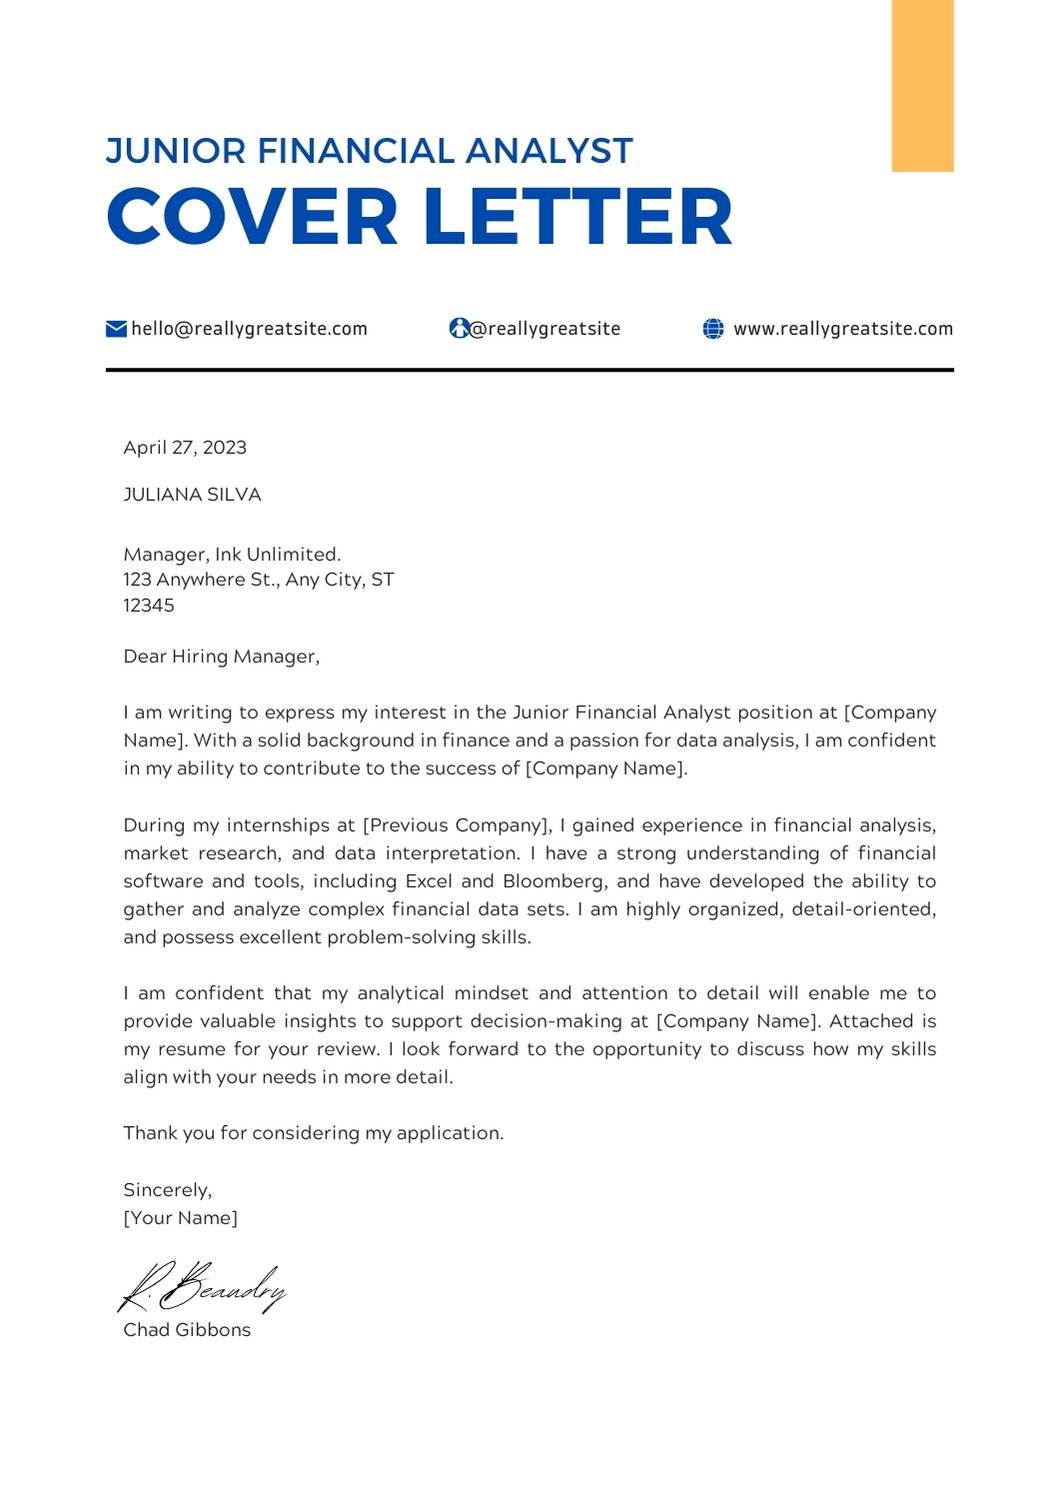 cover letter for junior financial analyst